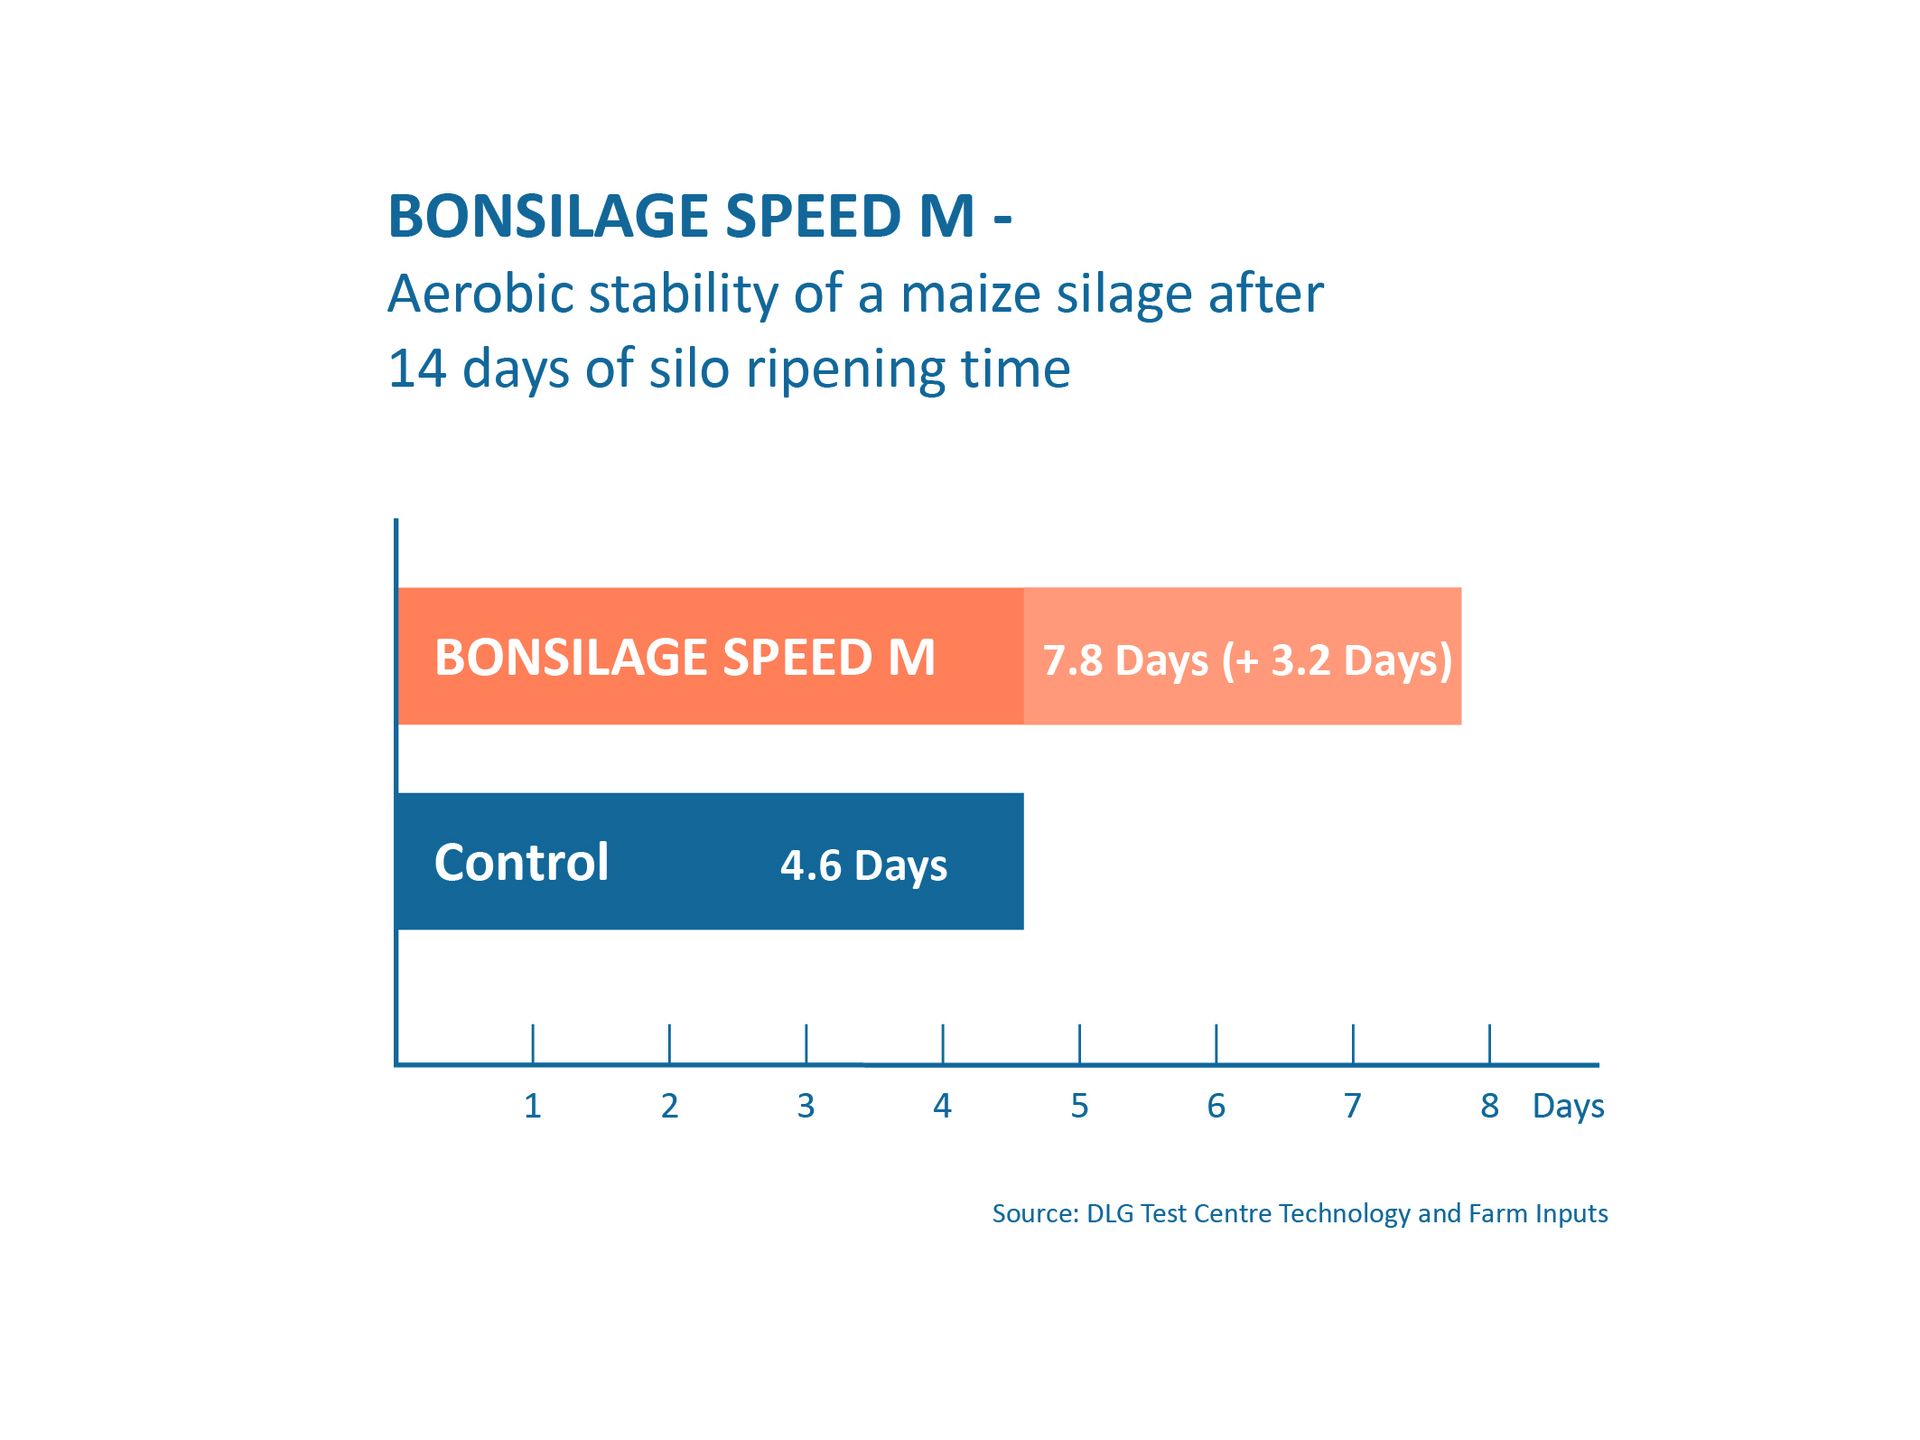 Aerobic stability of maize silage after 14 days of silage ripening